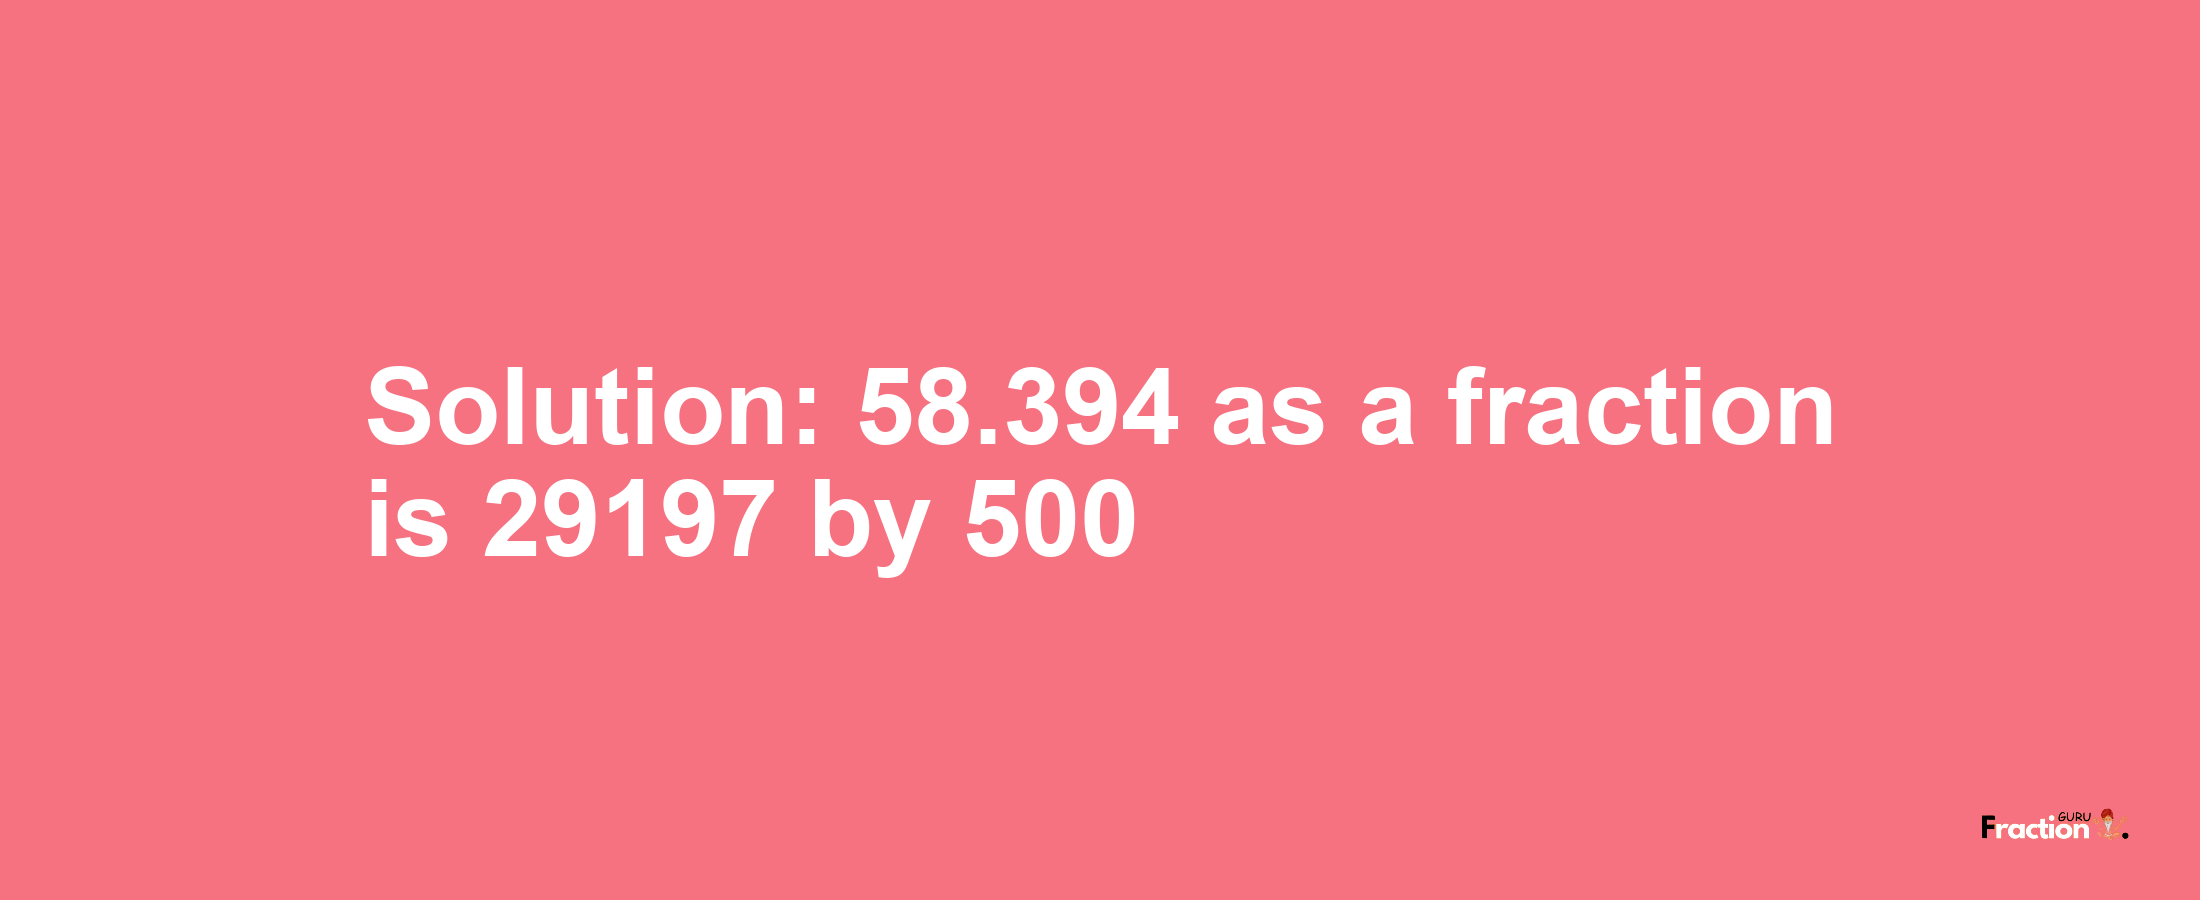 Solution:58.394 as a fraction is 29197/500